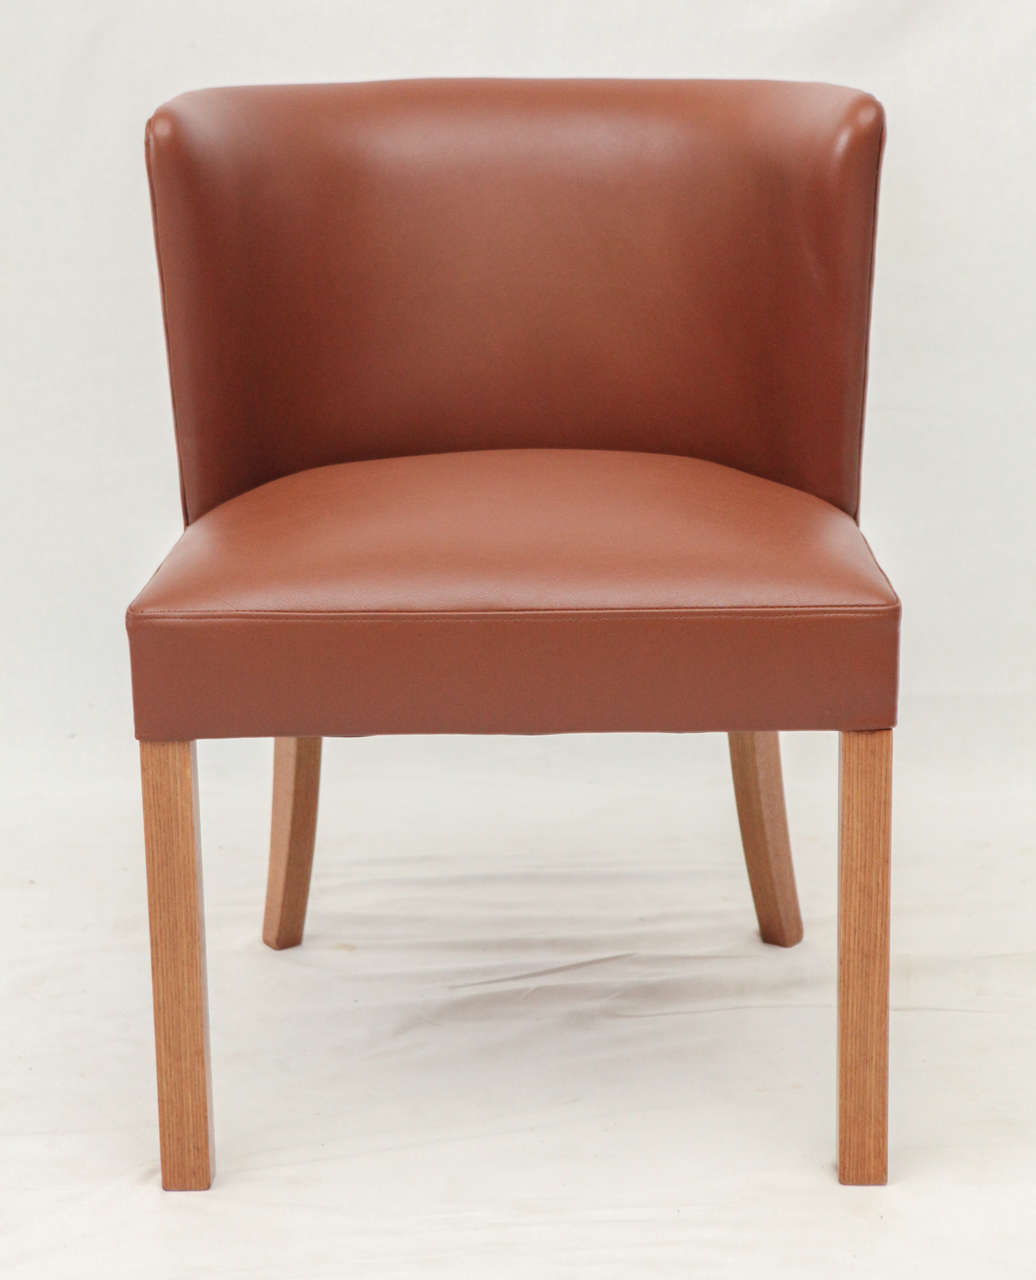 Danish Side Chair In The Style Of Frits Henningsen.